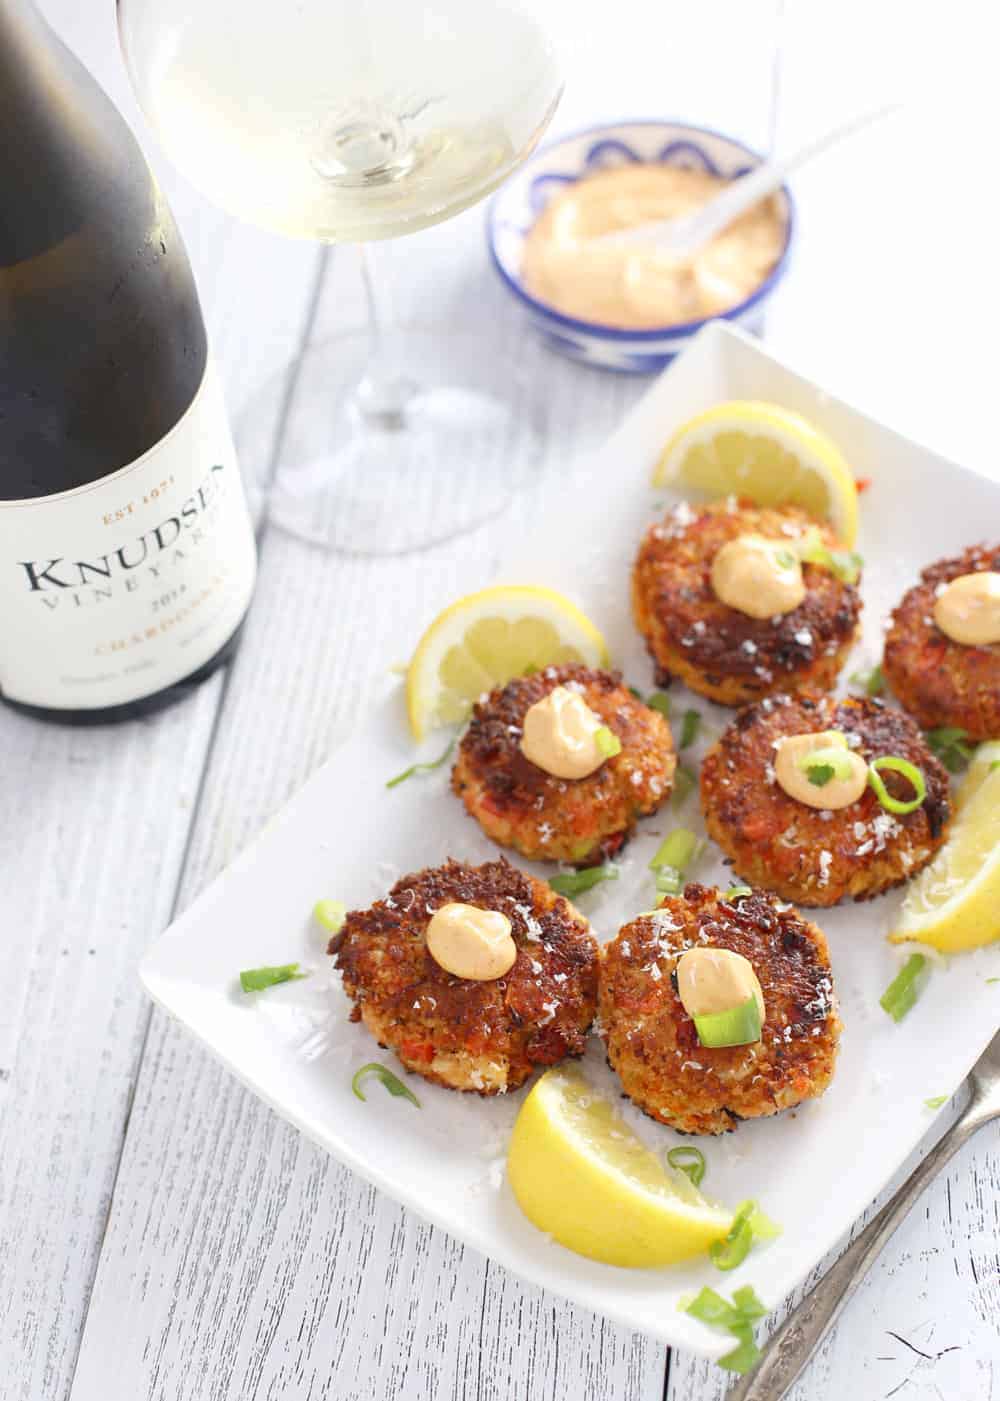 Smoked Salmon Cakes with Dungeness crab paired with wine